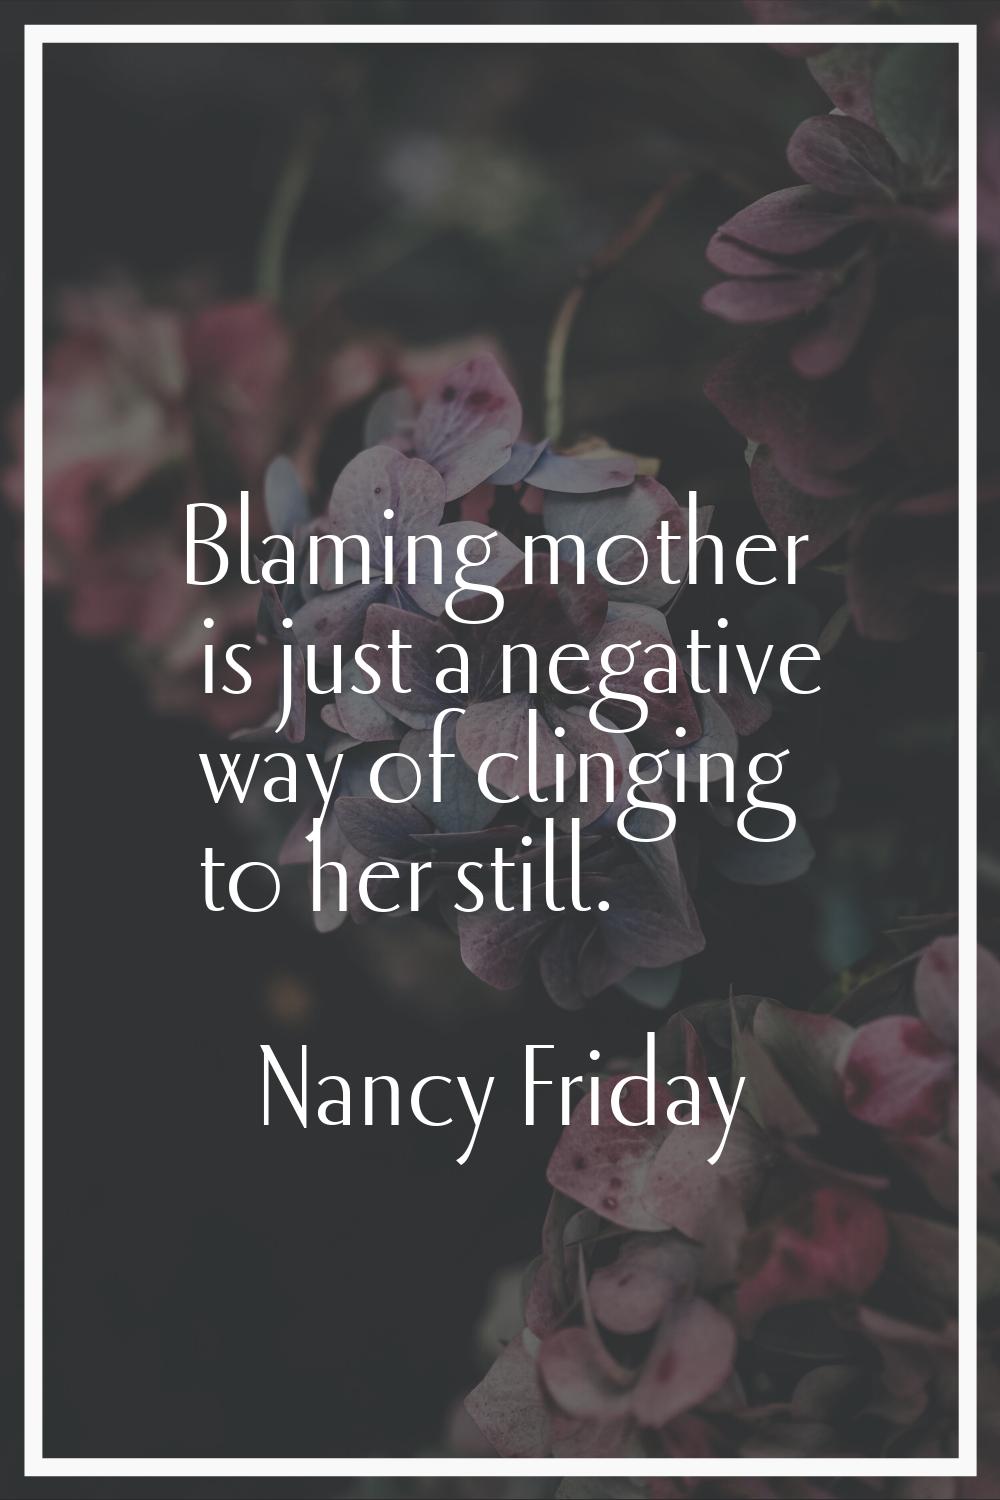 Blaming mother is just a negative way of clinging to her still.